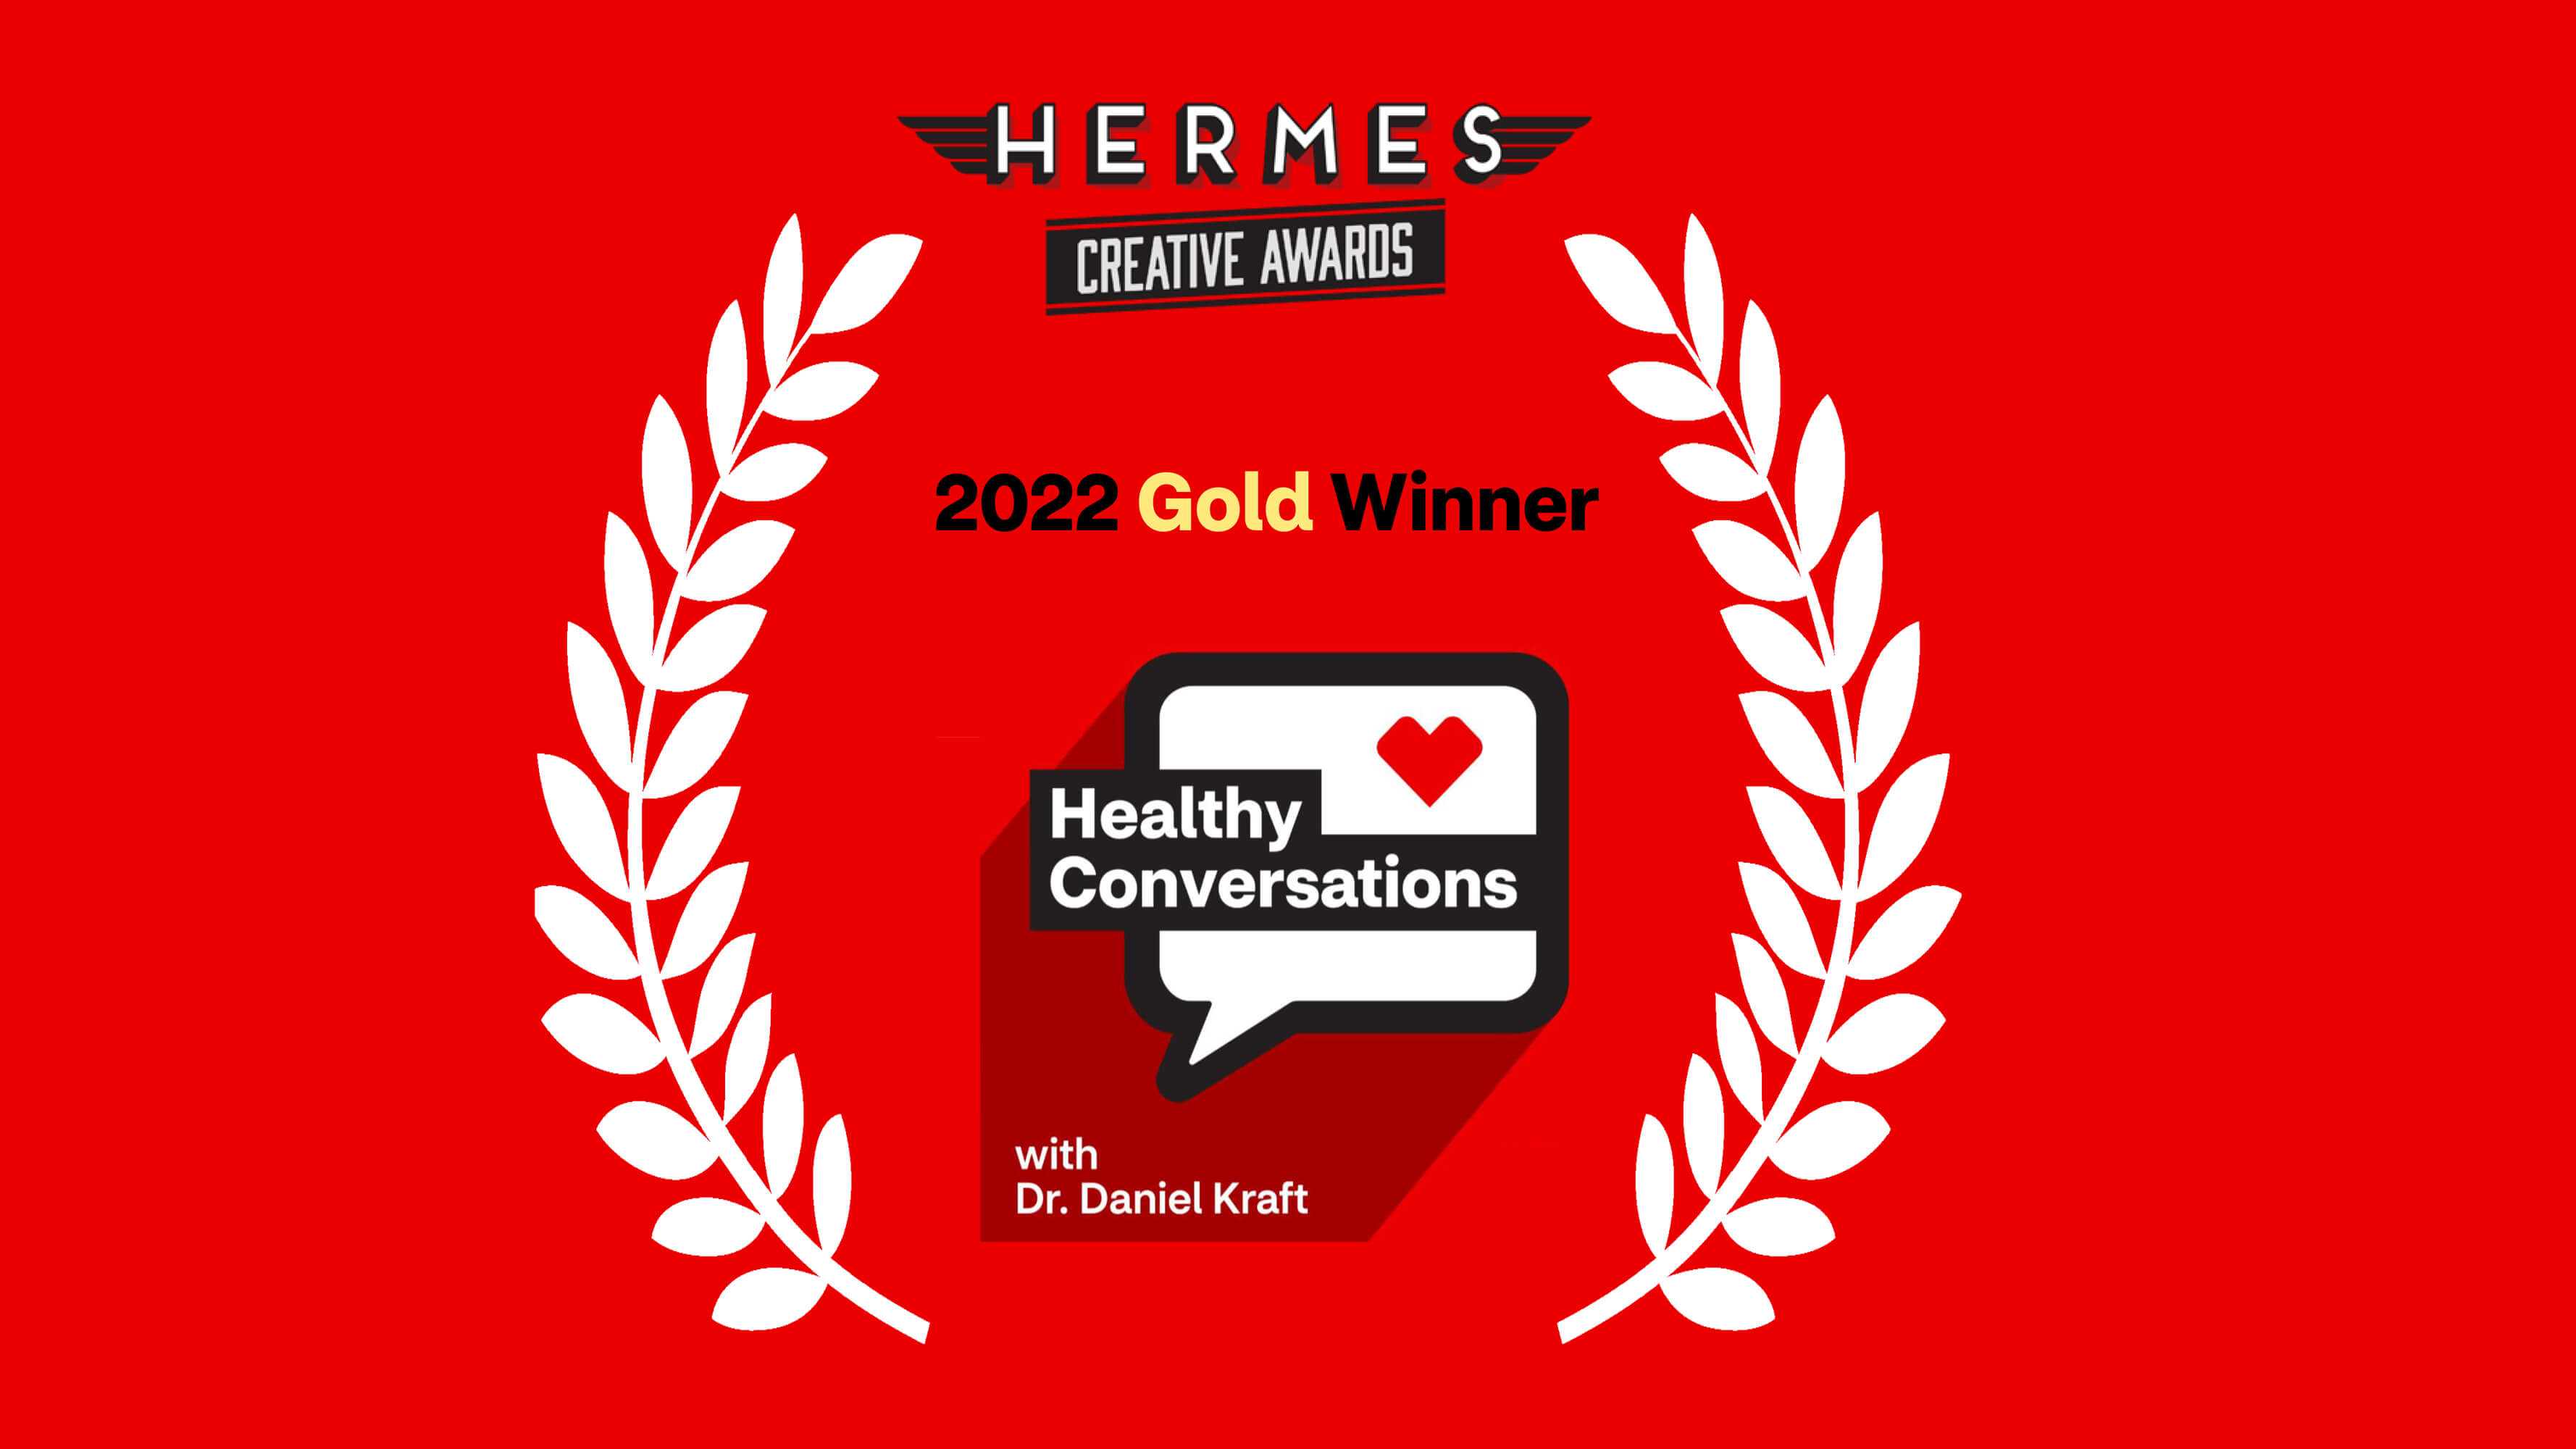 Podcast artwork for the Healthy Conversations podcast displaying the Hermes Creative Awards 2022 Gold Winner badge